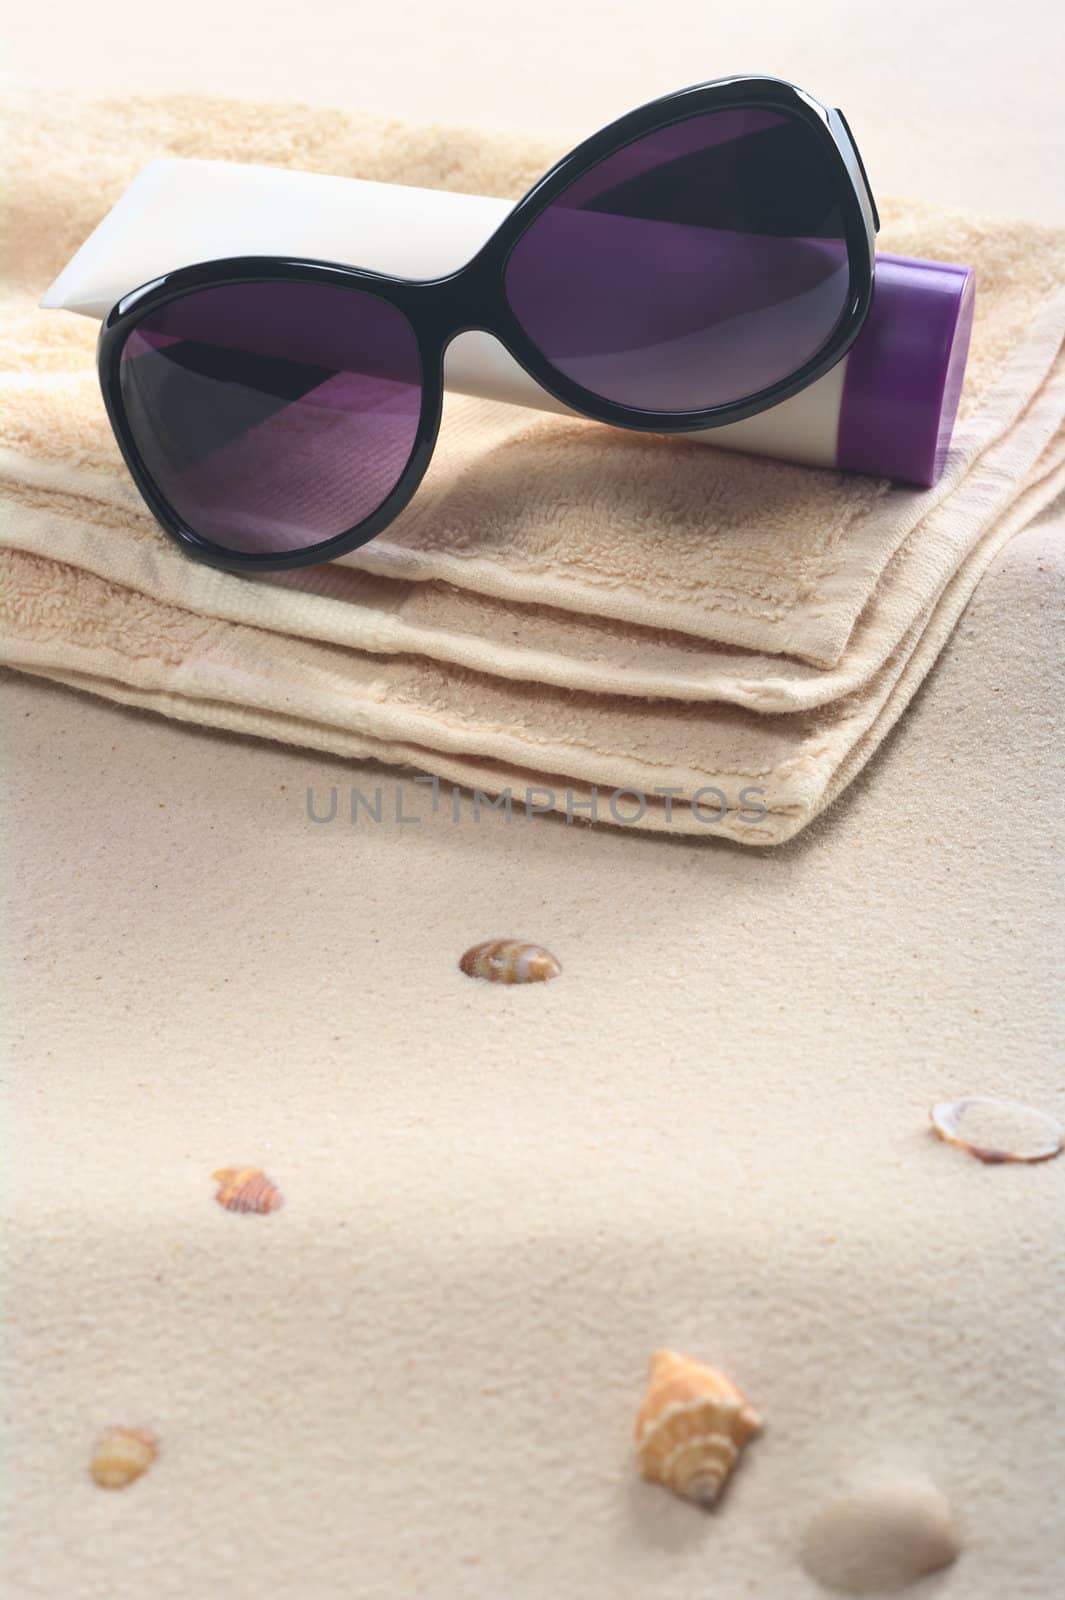 Beach setting with sunglasses, suncream and towels on sand with shells (Selective Focus, Focus on the sunglasses)